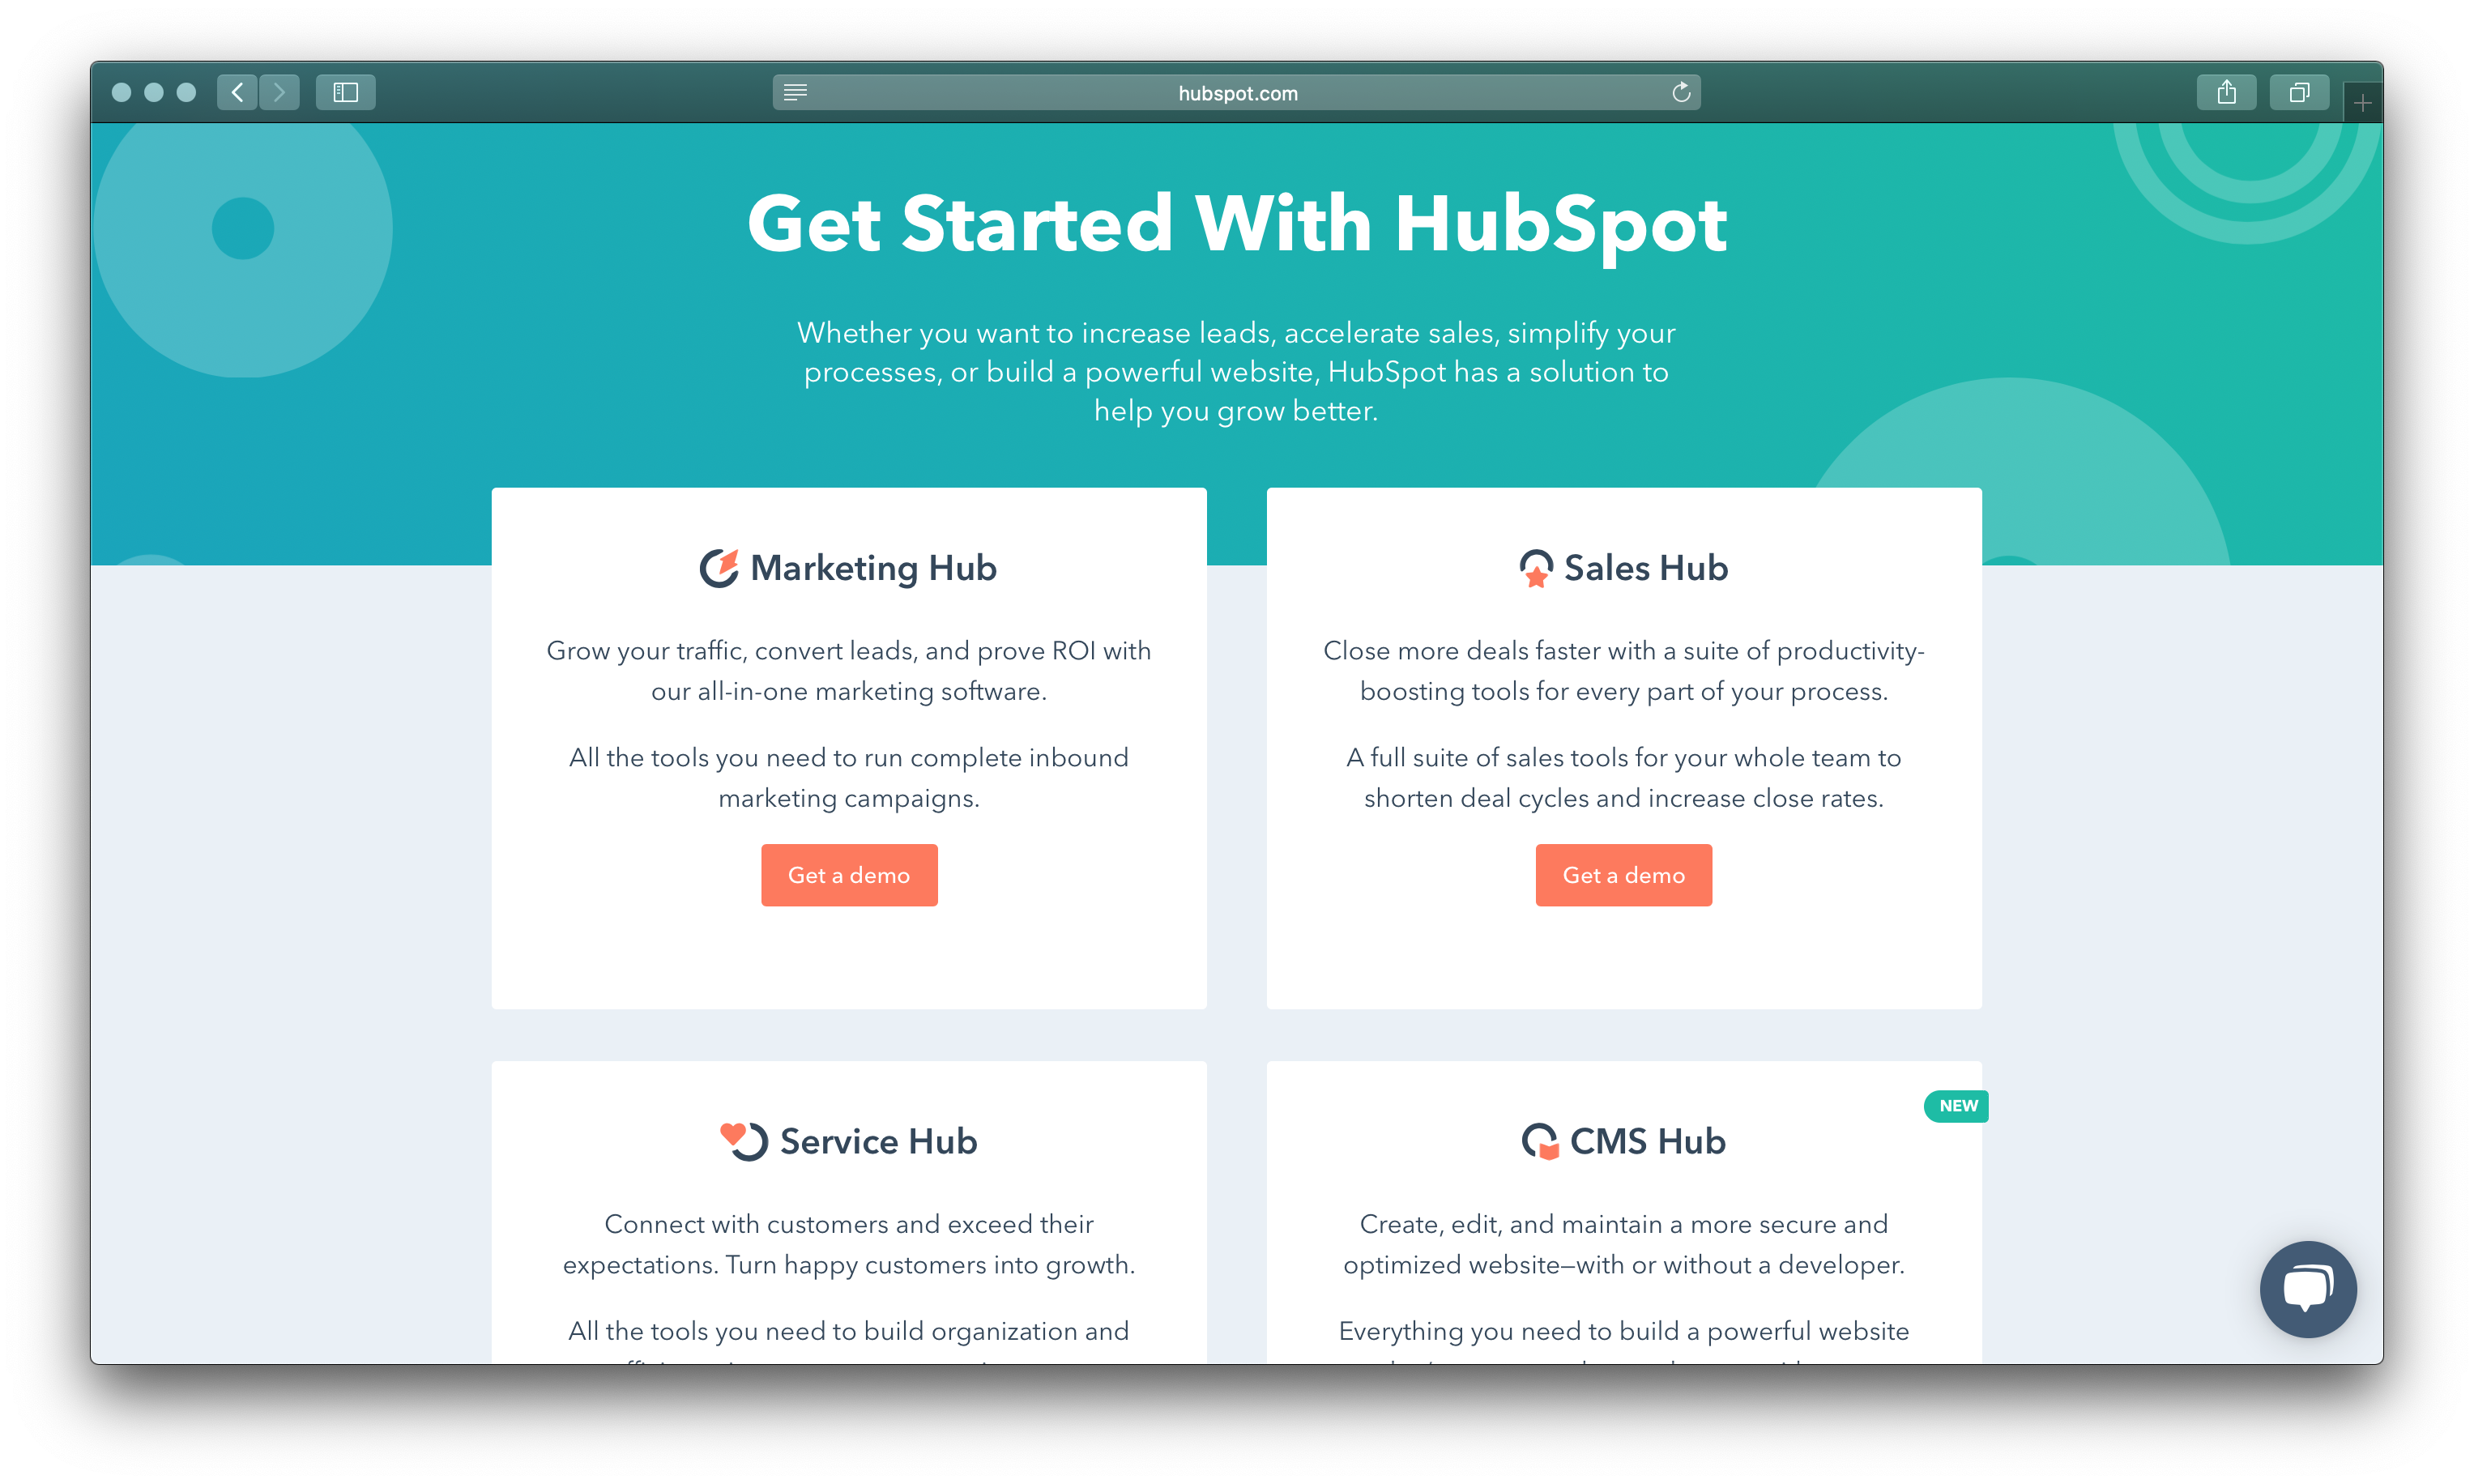 Getting Started | Choosing the right HubSpot packaged for your business